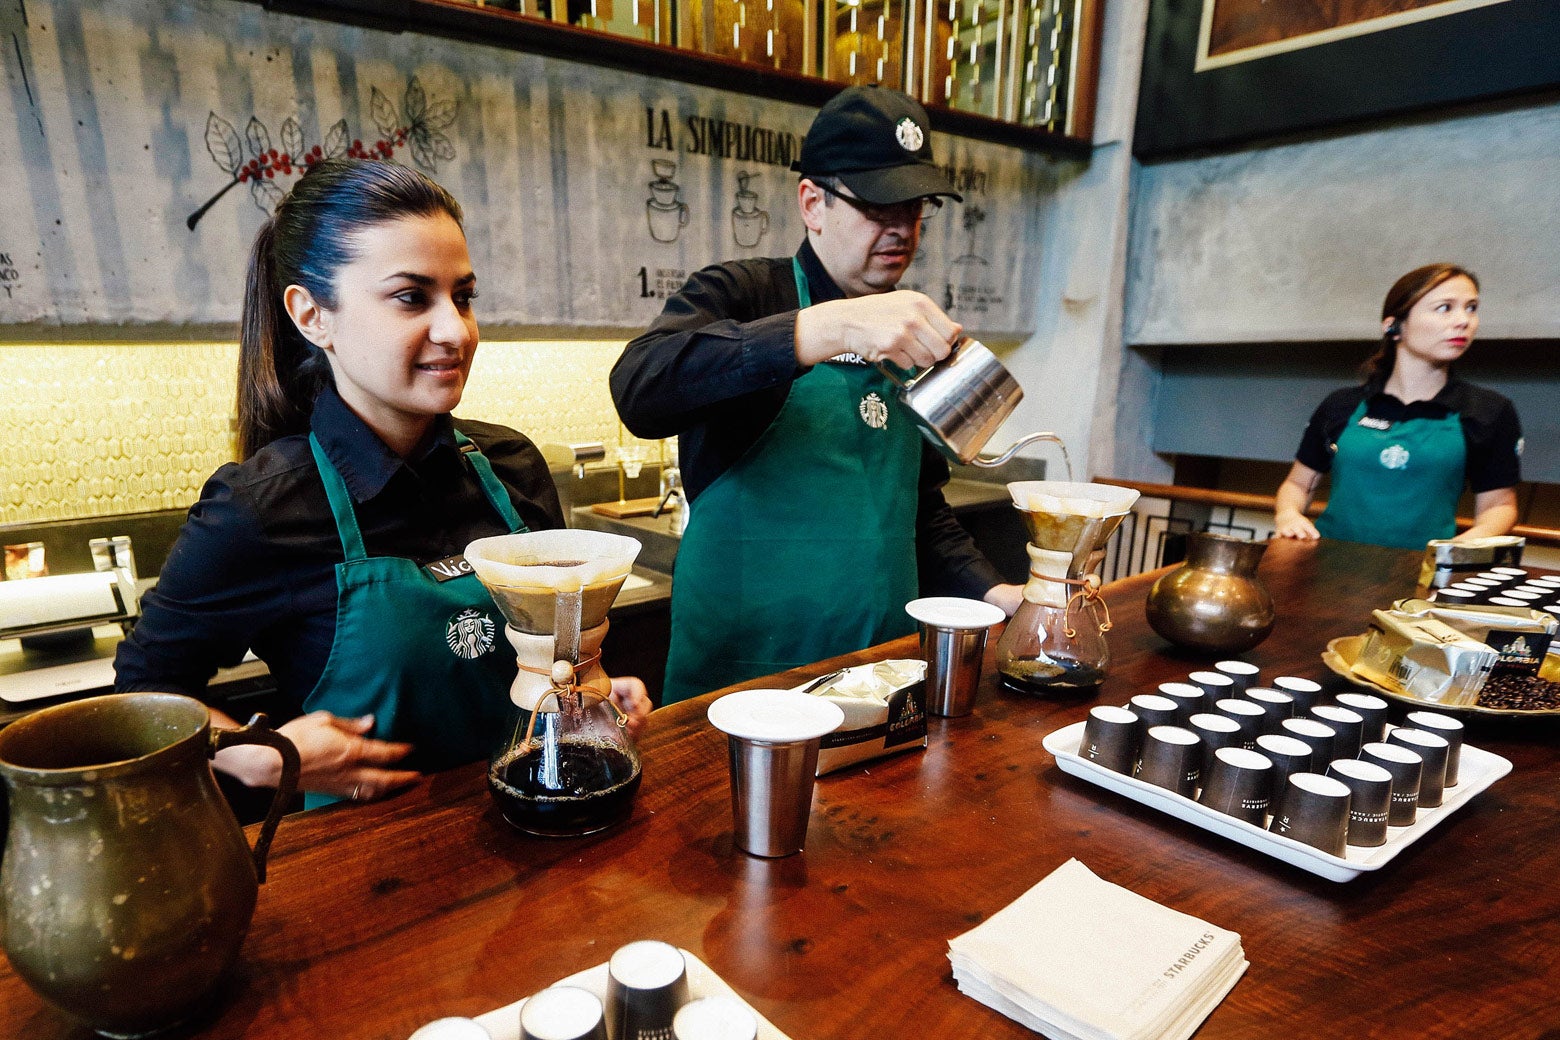 Workers prepare coffee during the inauguration of the first Starbucks in Bogota, Colombia on July 16, 2014.